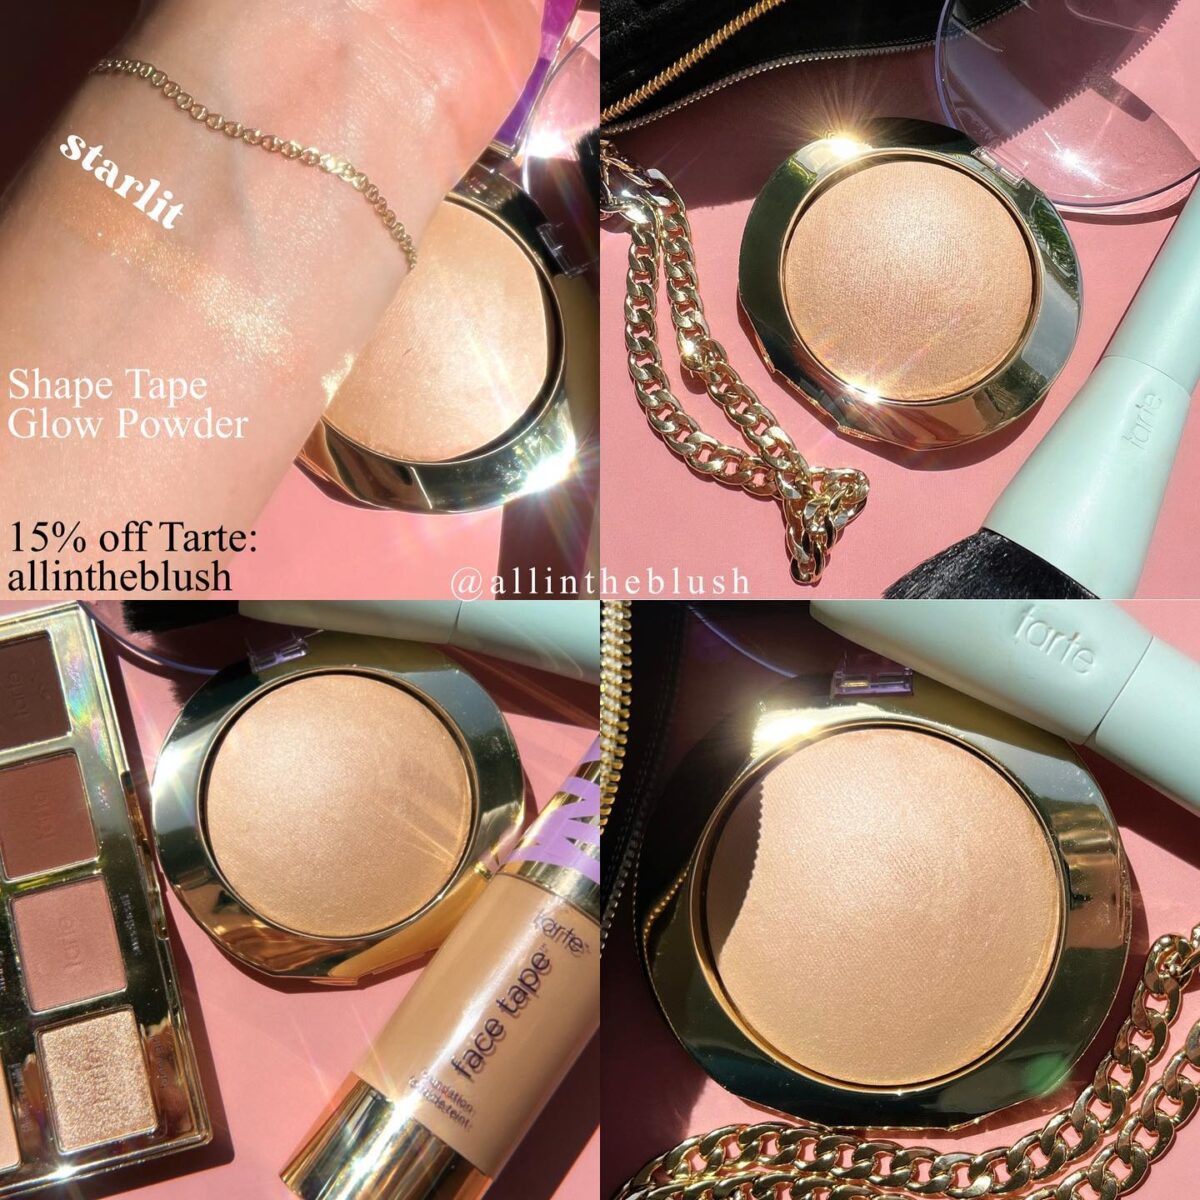 Tarte Shape Tape Glow Powder: Review & Swatches + 15% off Tarte with code: ALLINTHEBLUSH